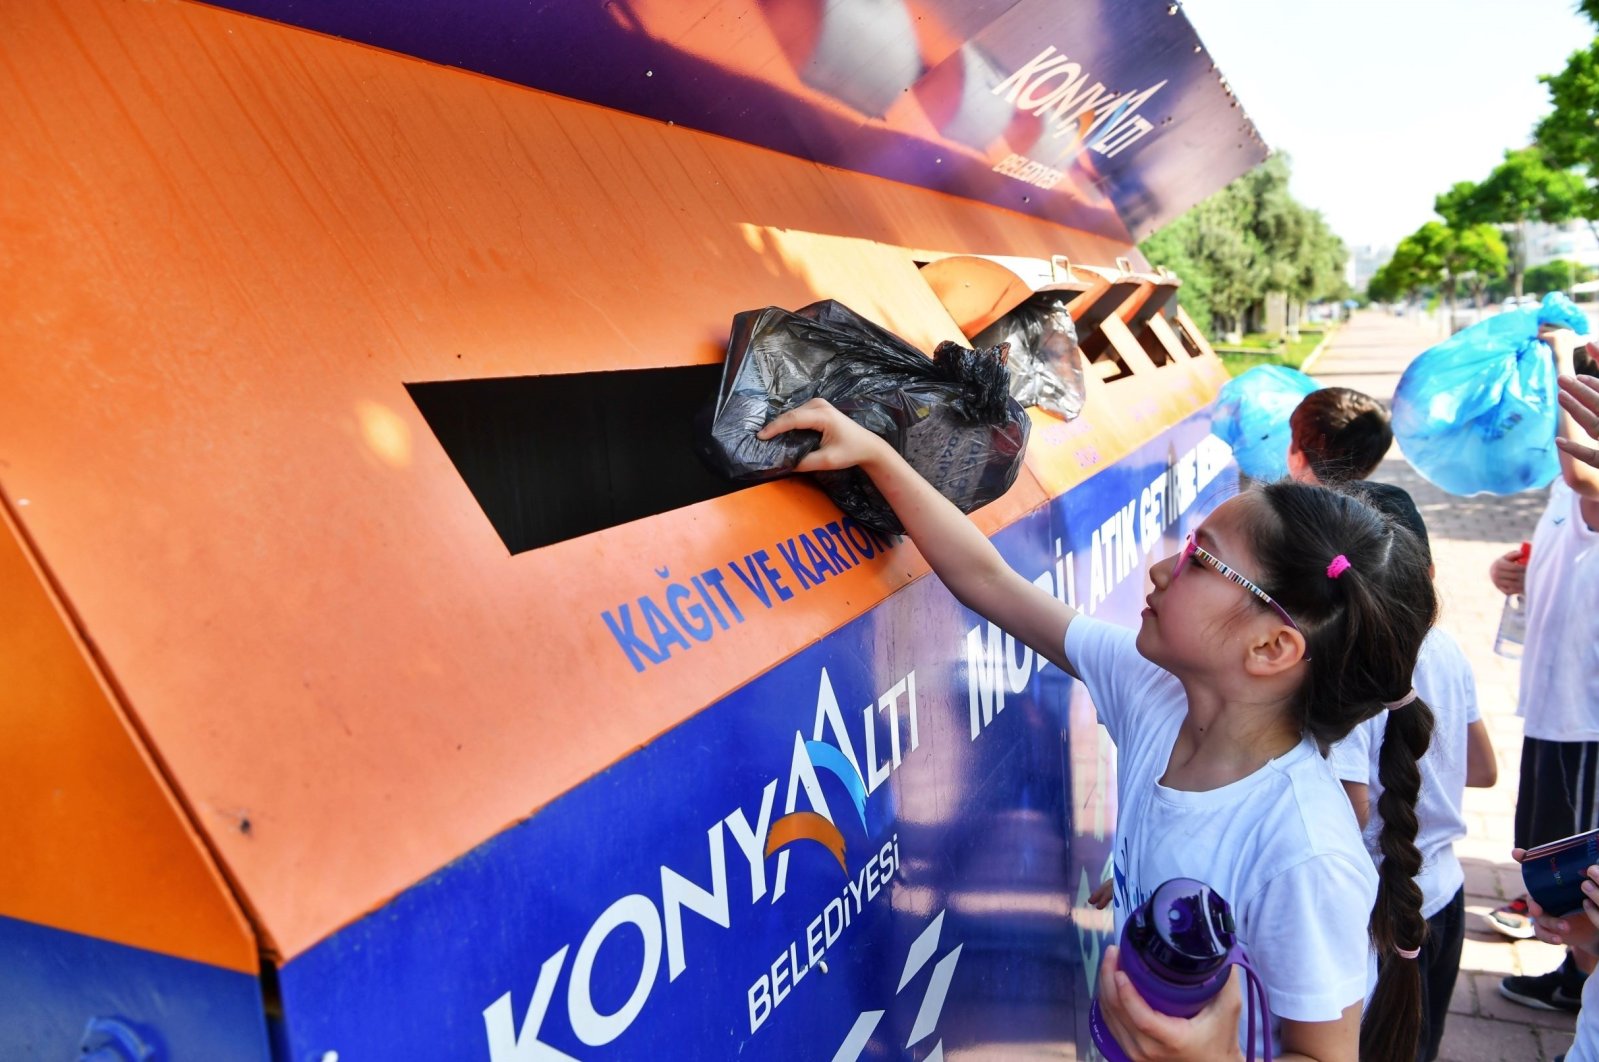 Students dispose of waste in recycling dumpsters during a recycling training program, in Konyaaltı, Antalya, southern Turkey, May 30, 2022. (İHA PHOTO)